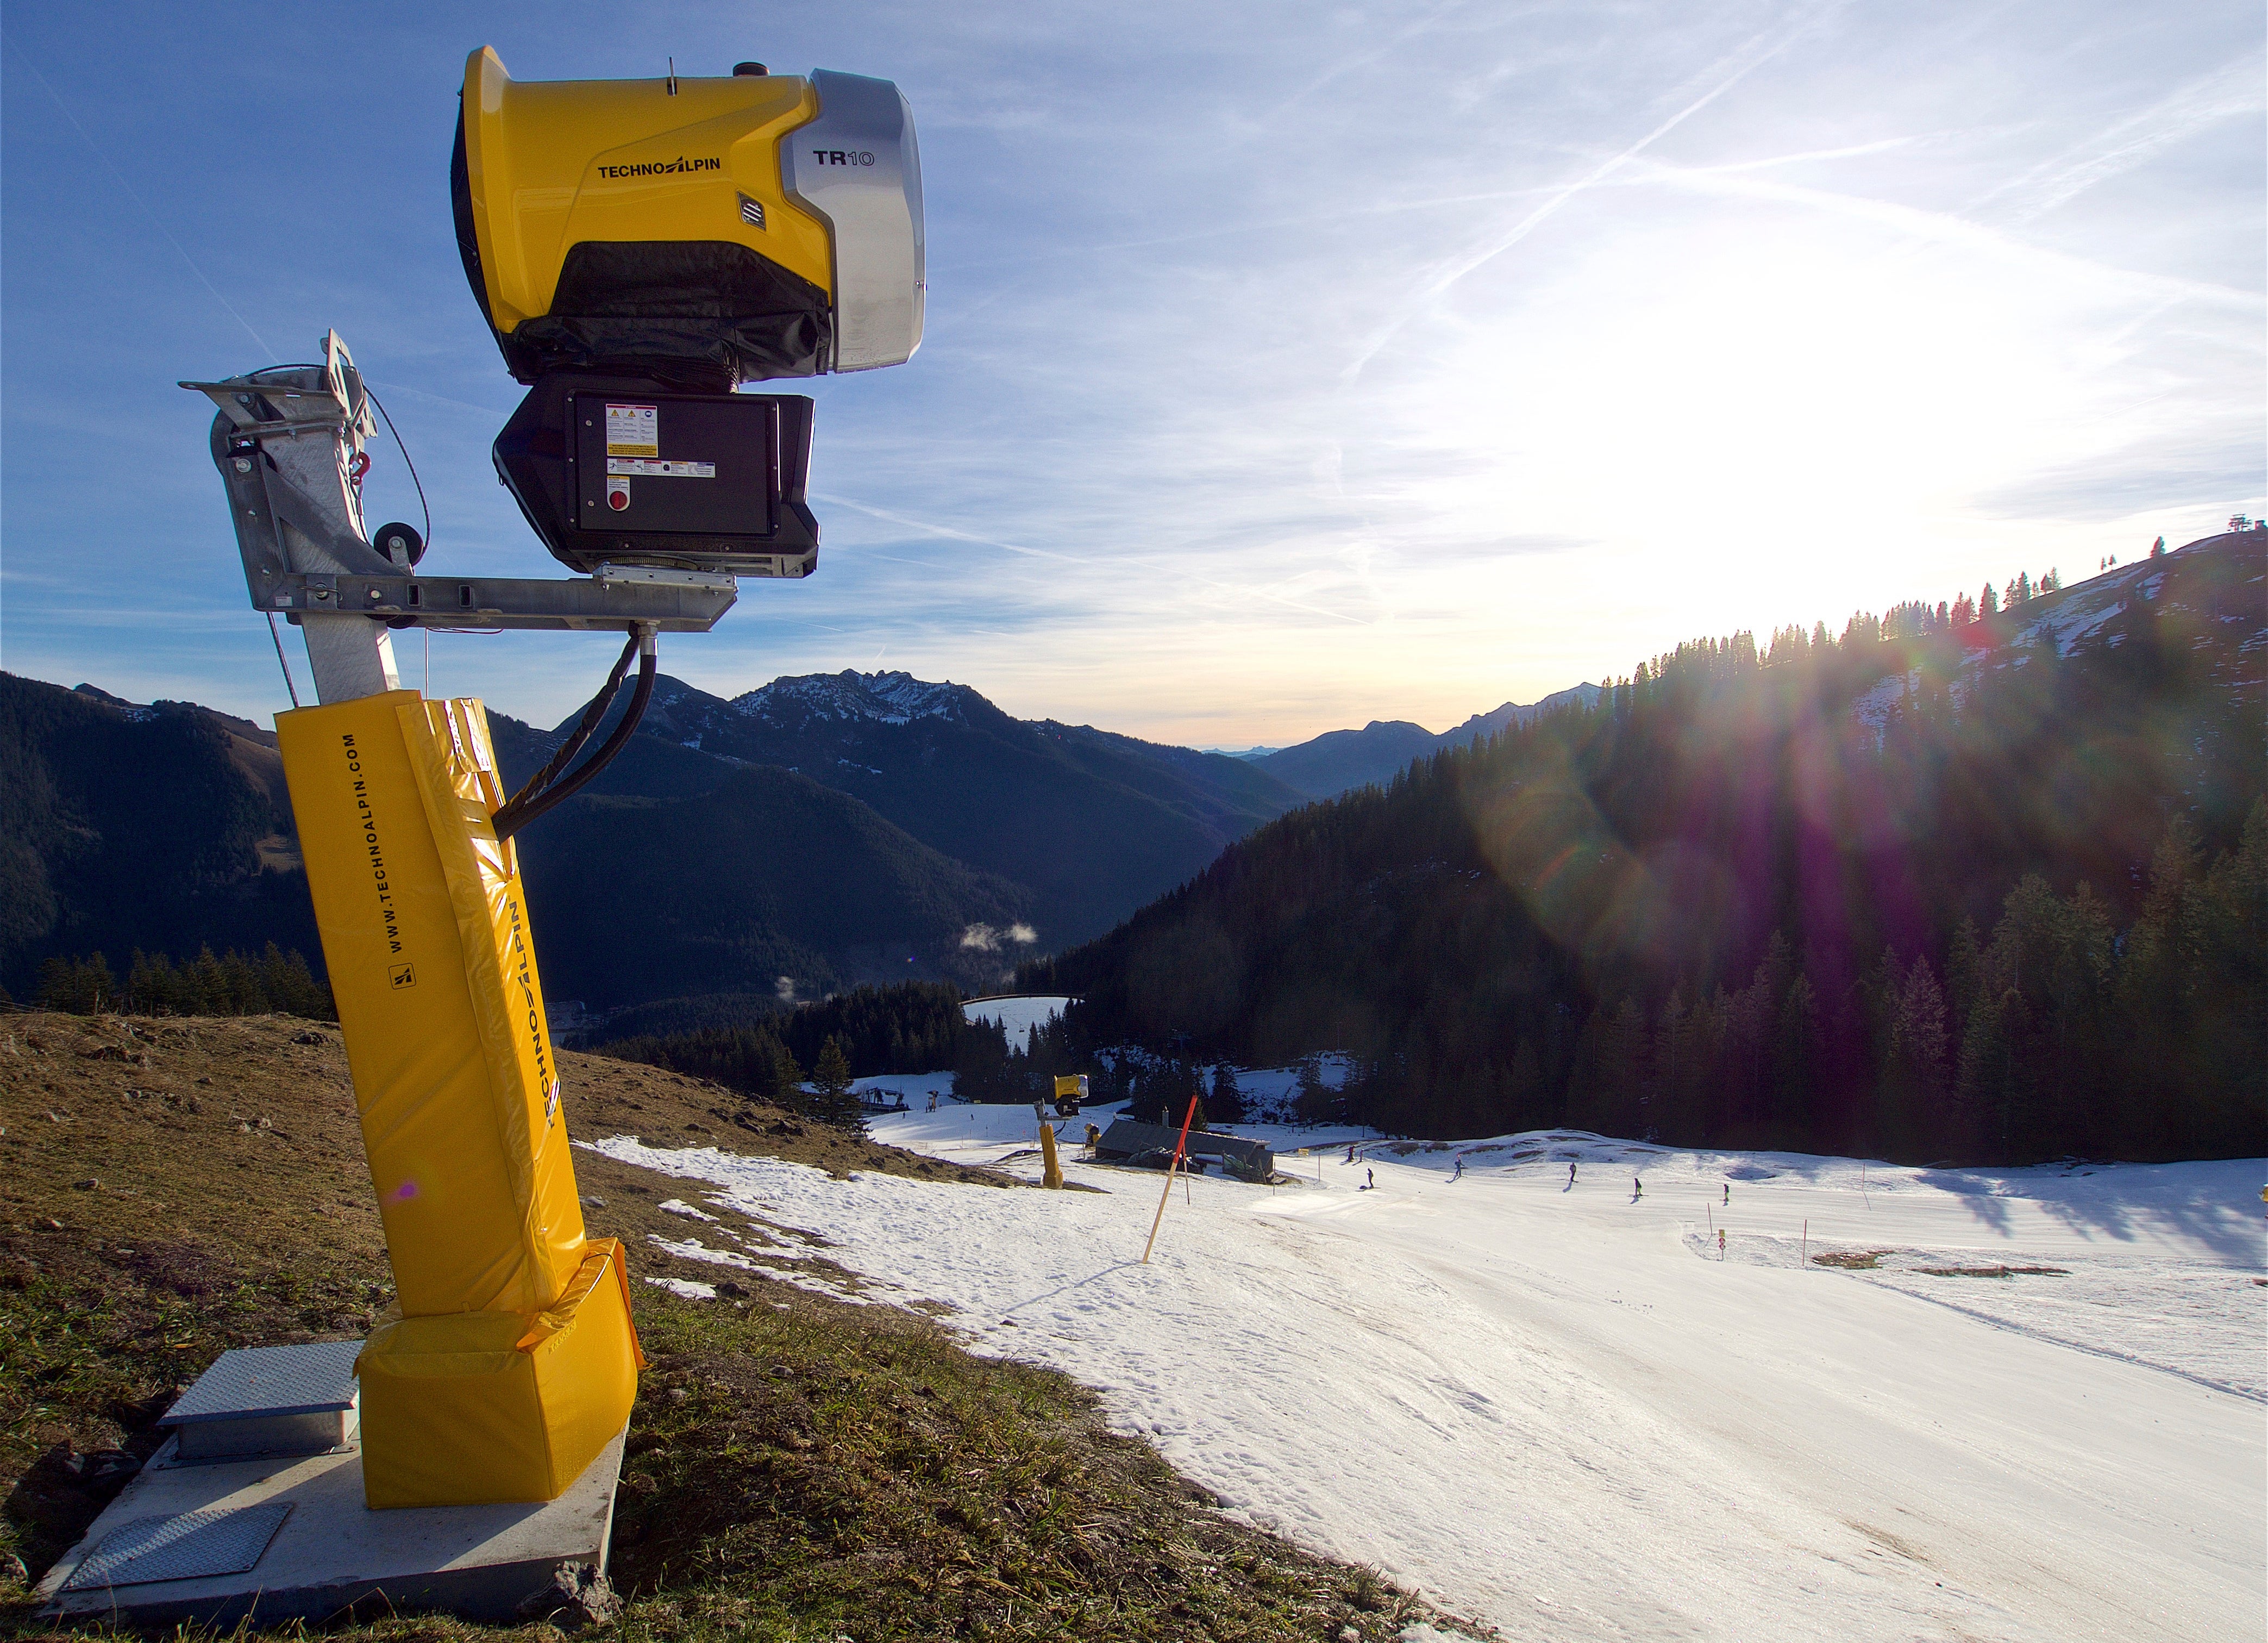 A snow machine at Spitzingsee in Bavaria, Germany. (Photo: Carsten Hoefer/picture-alliance/dpa, AP)